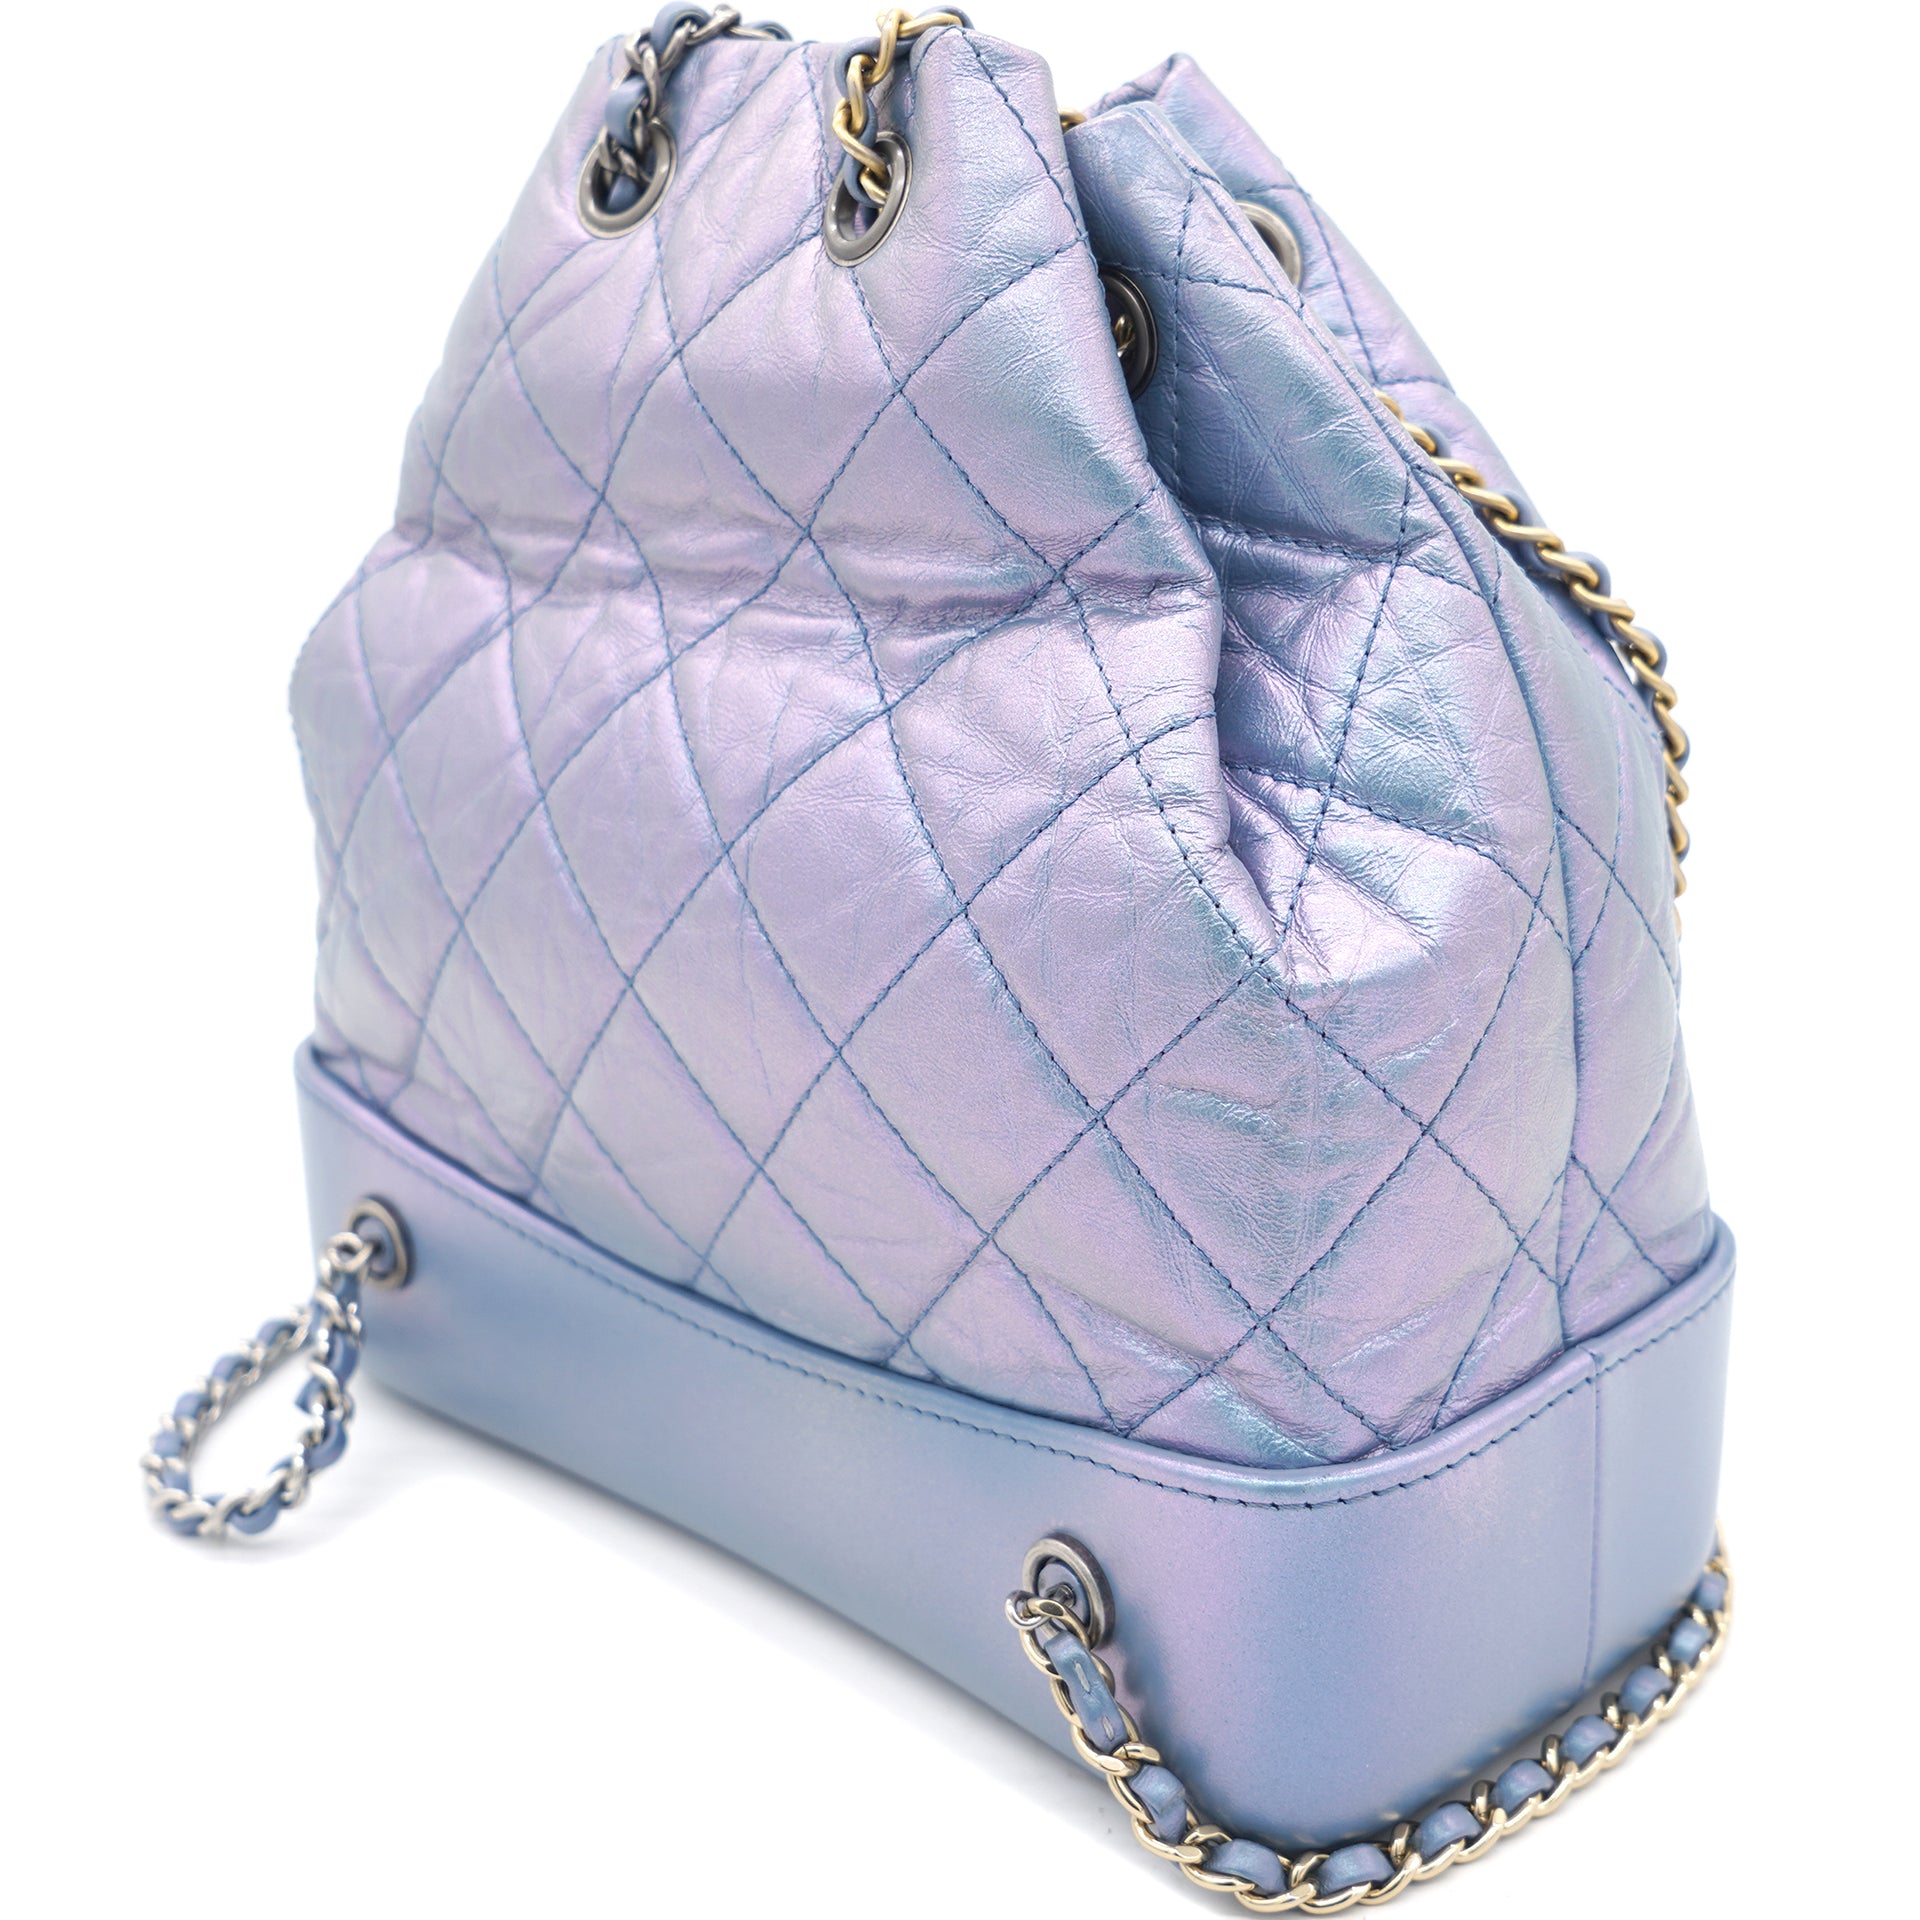 Gabrielle backpack in Purple leather